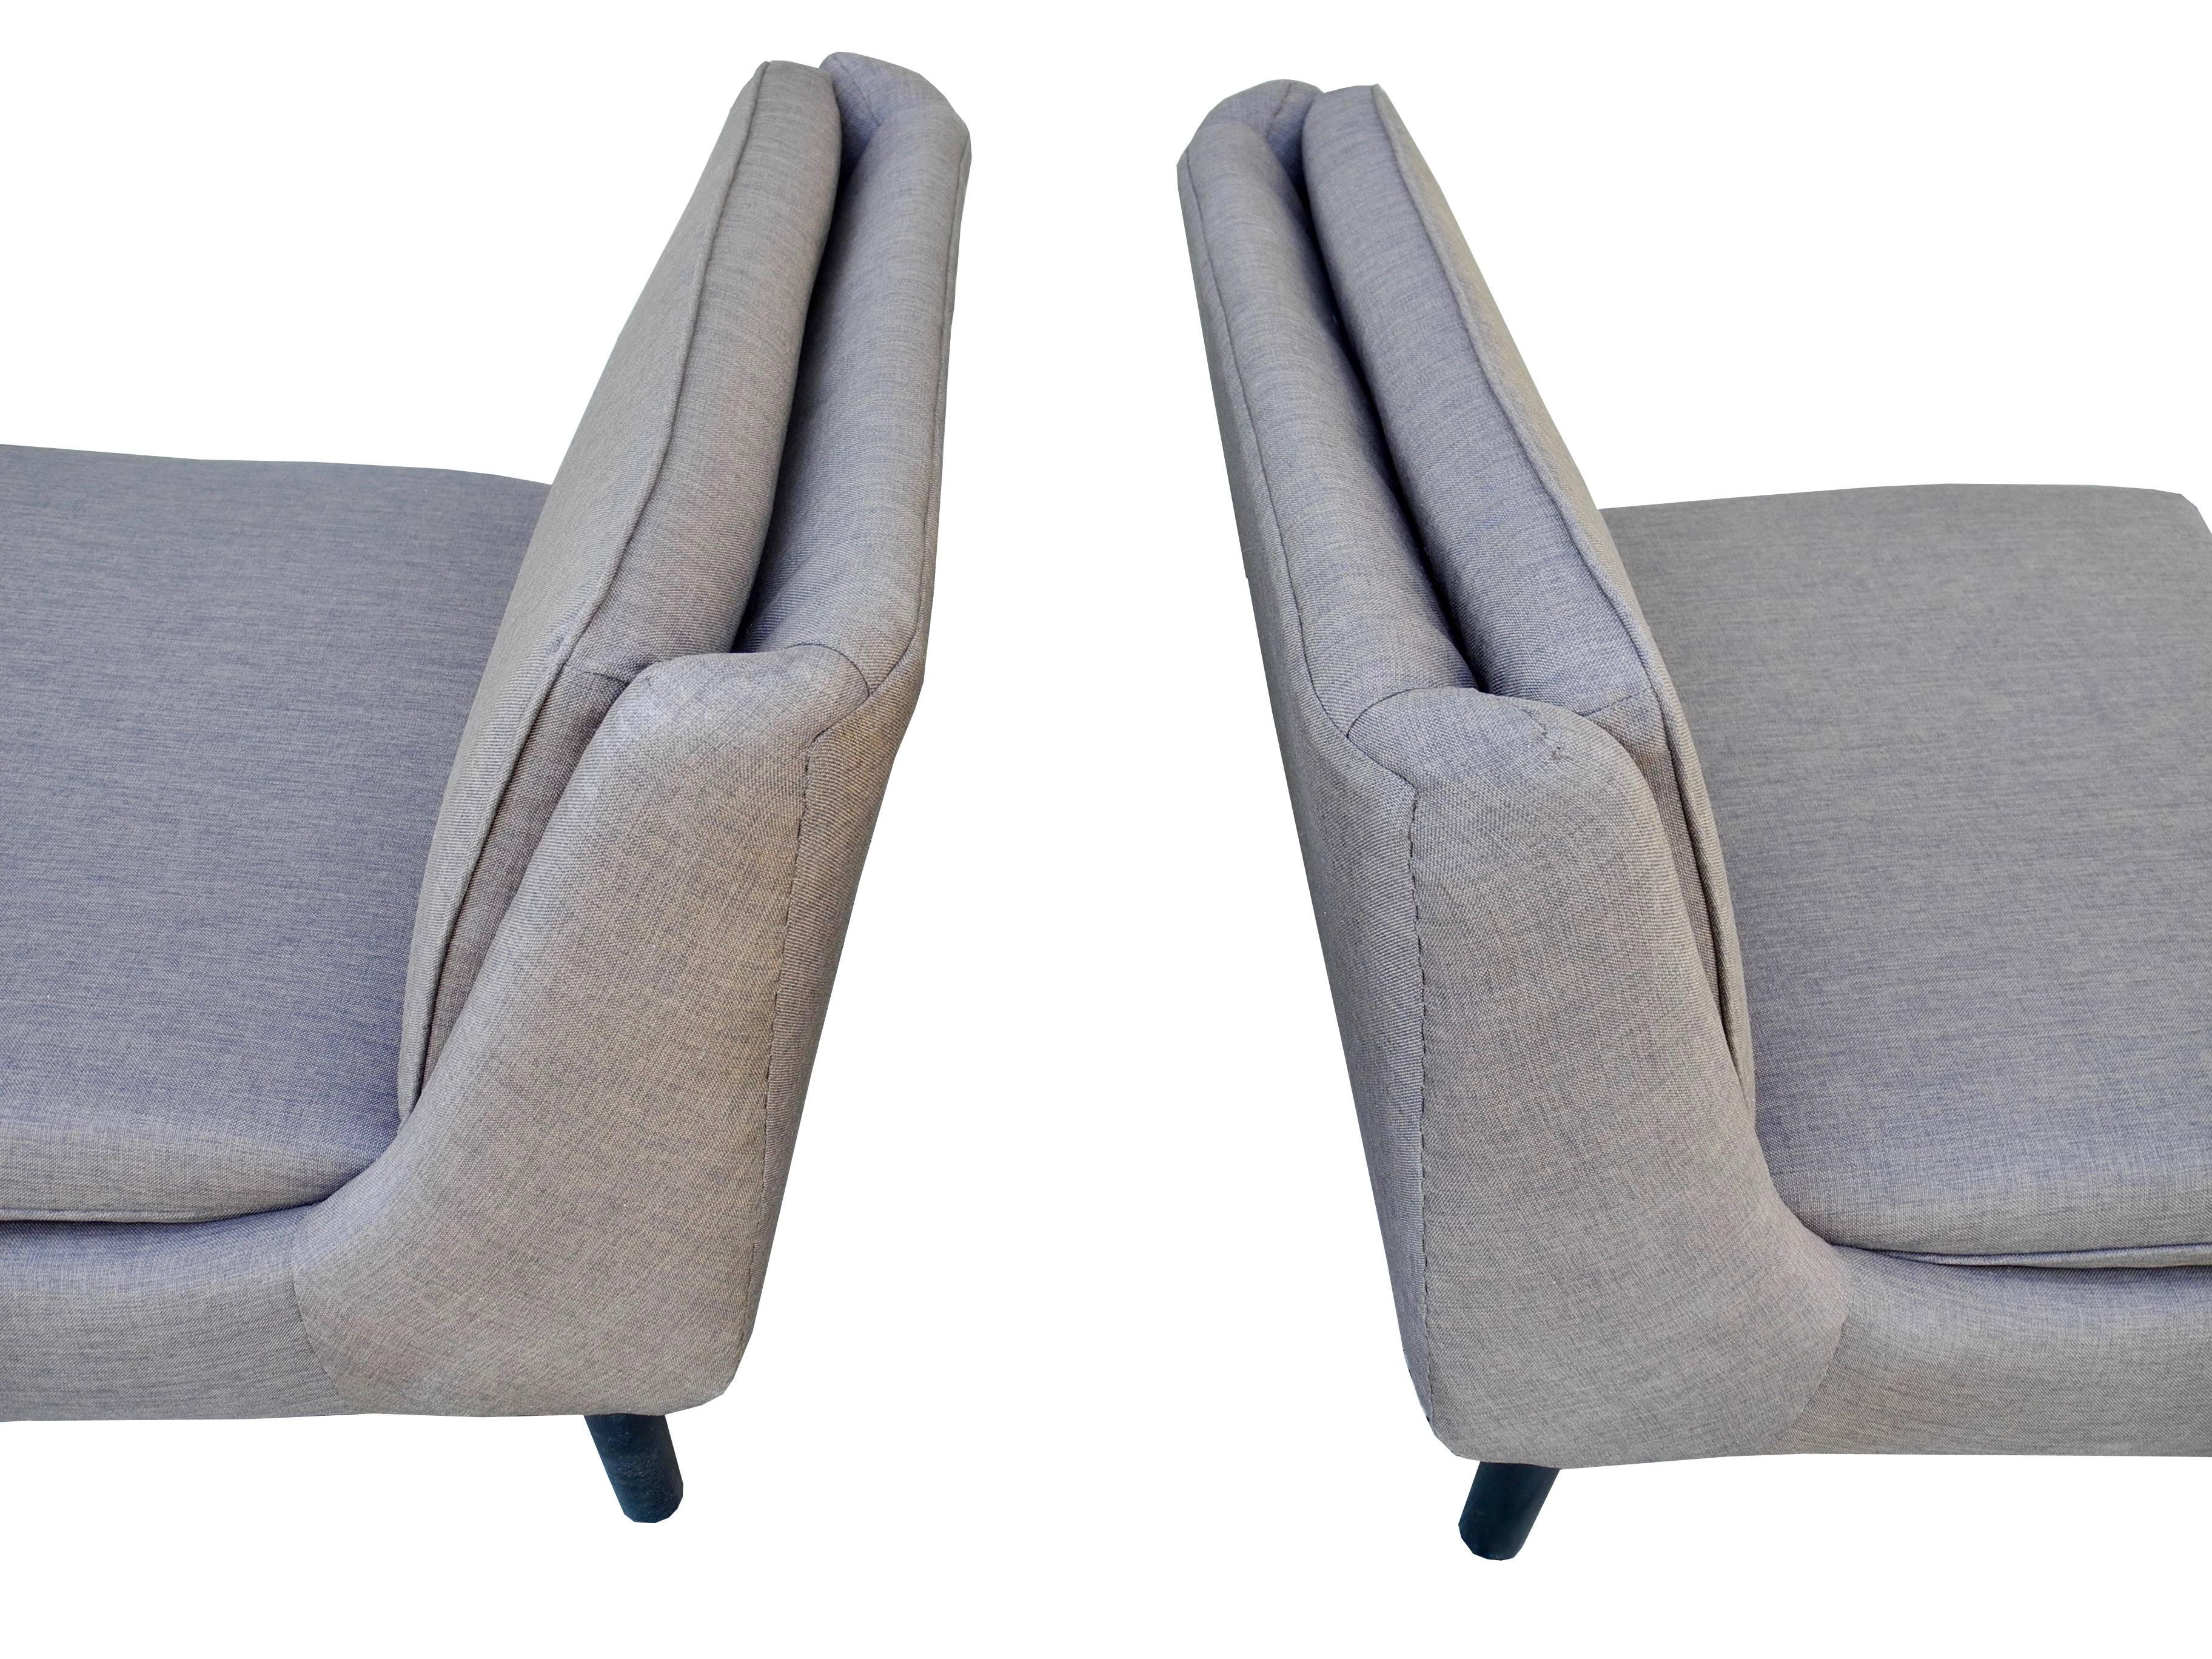 20th Century Pair of Mid-Century Modern Upholstered Linen Slipper Chairs by Widdicomb For Sale